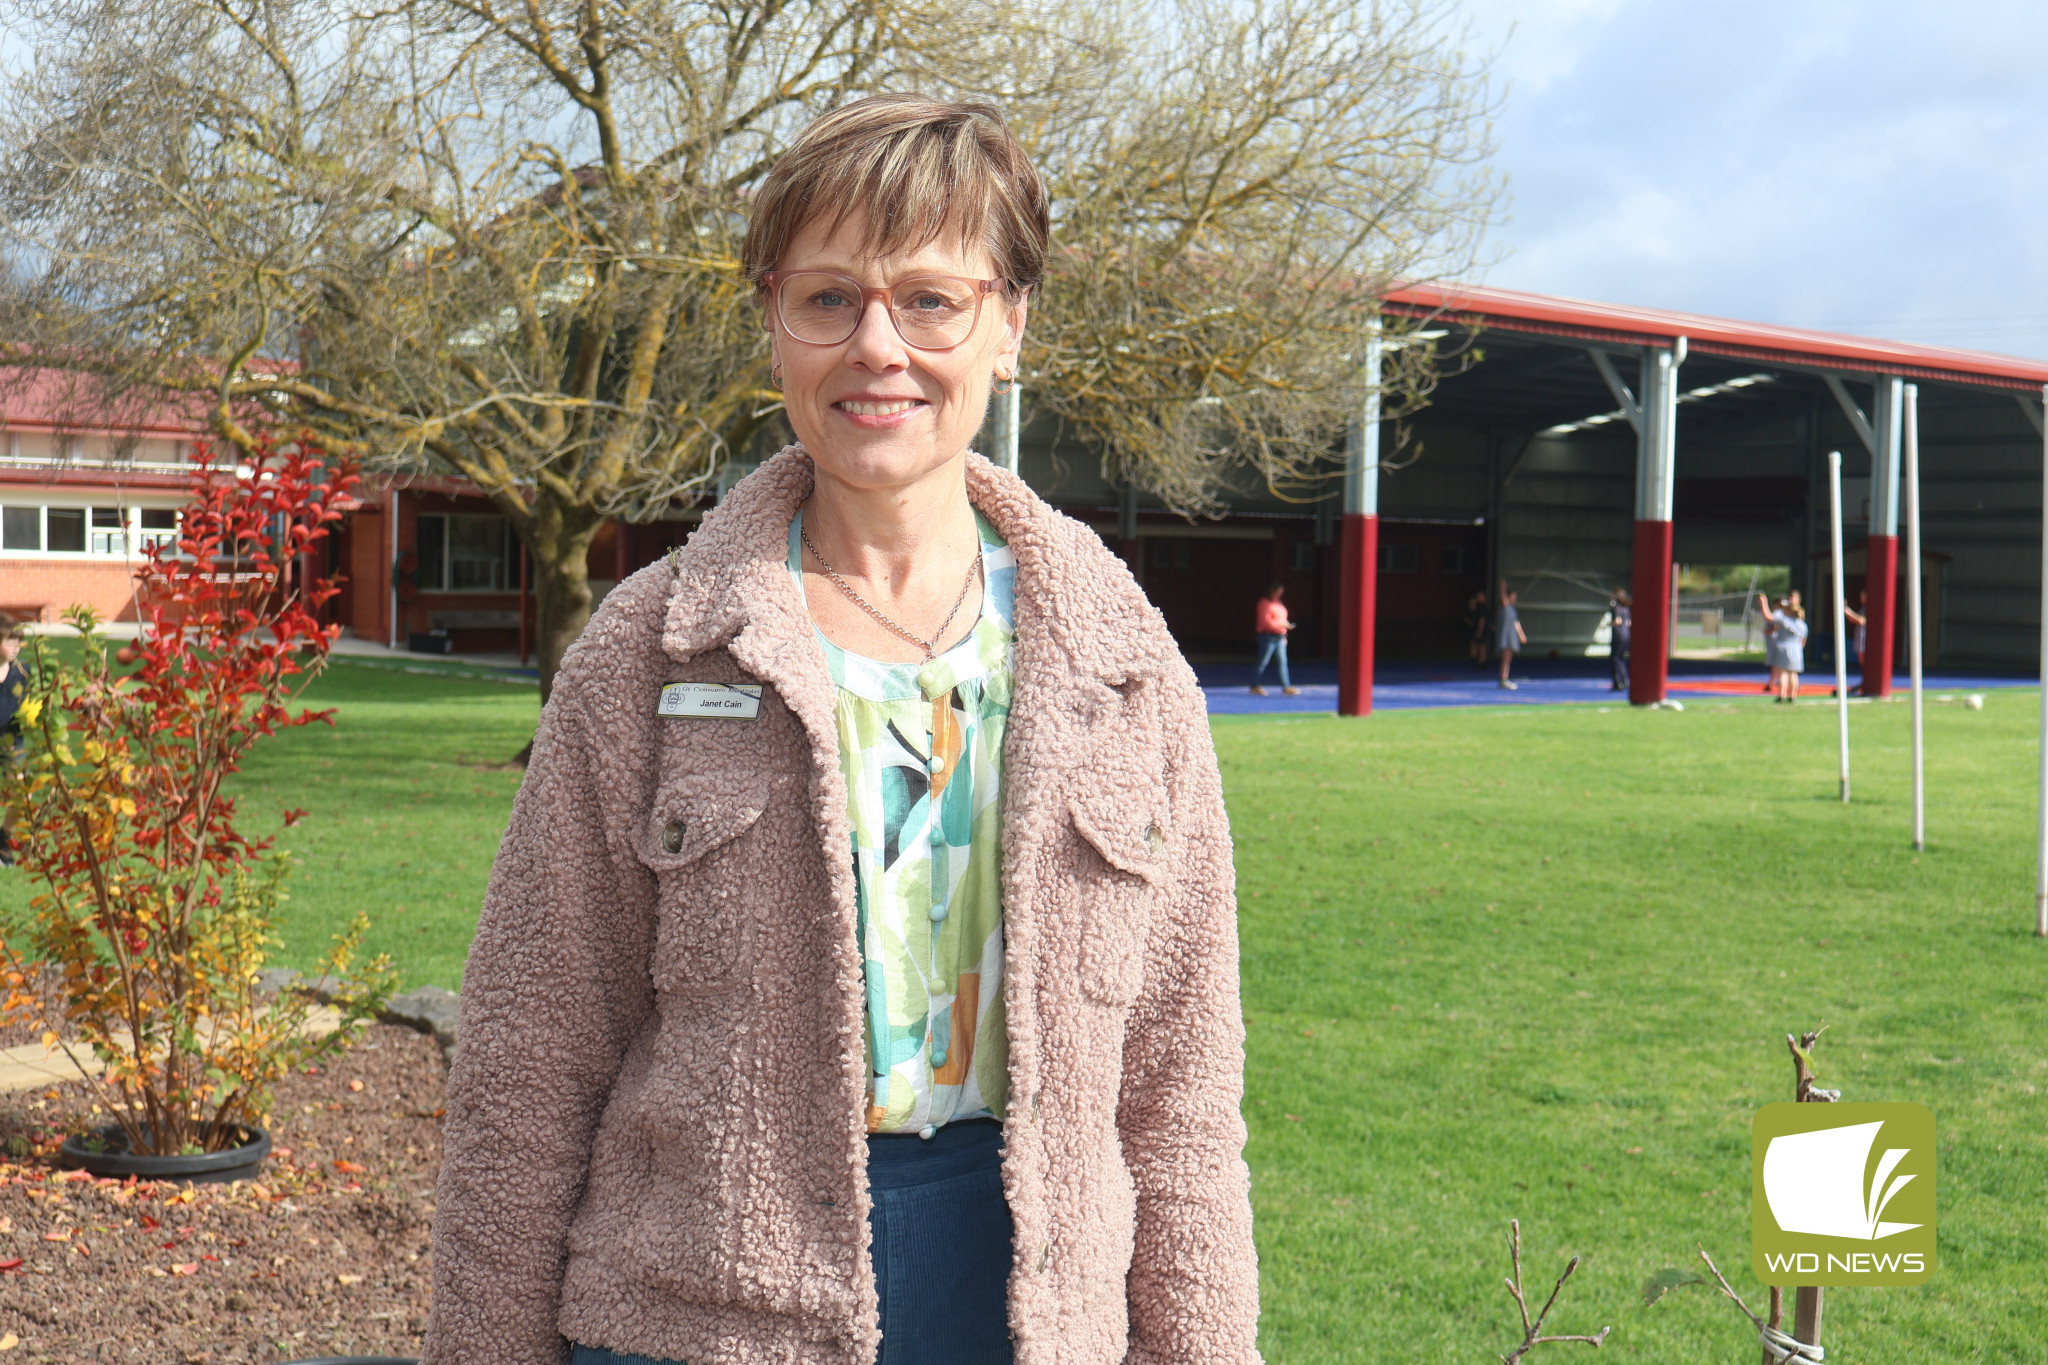 Growth: Reflecting on her three decades of commitment to education, Mrs Cain said she believed an emphasis on student wellbeing had been among the biggest changes.